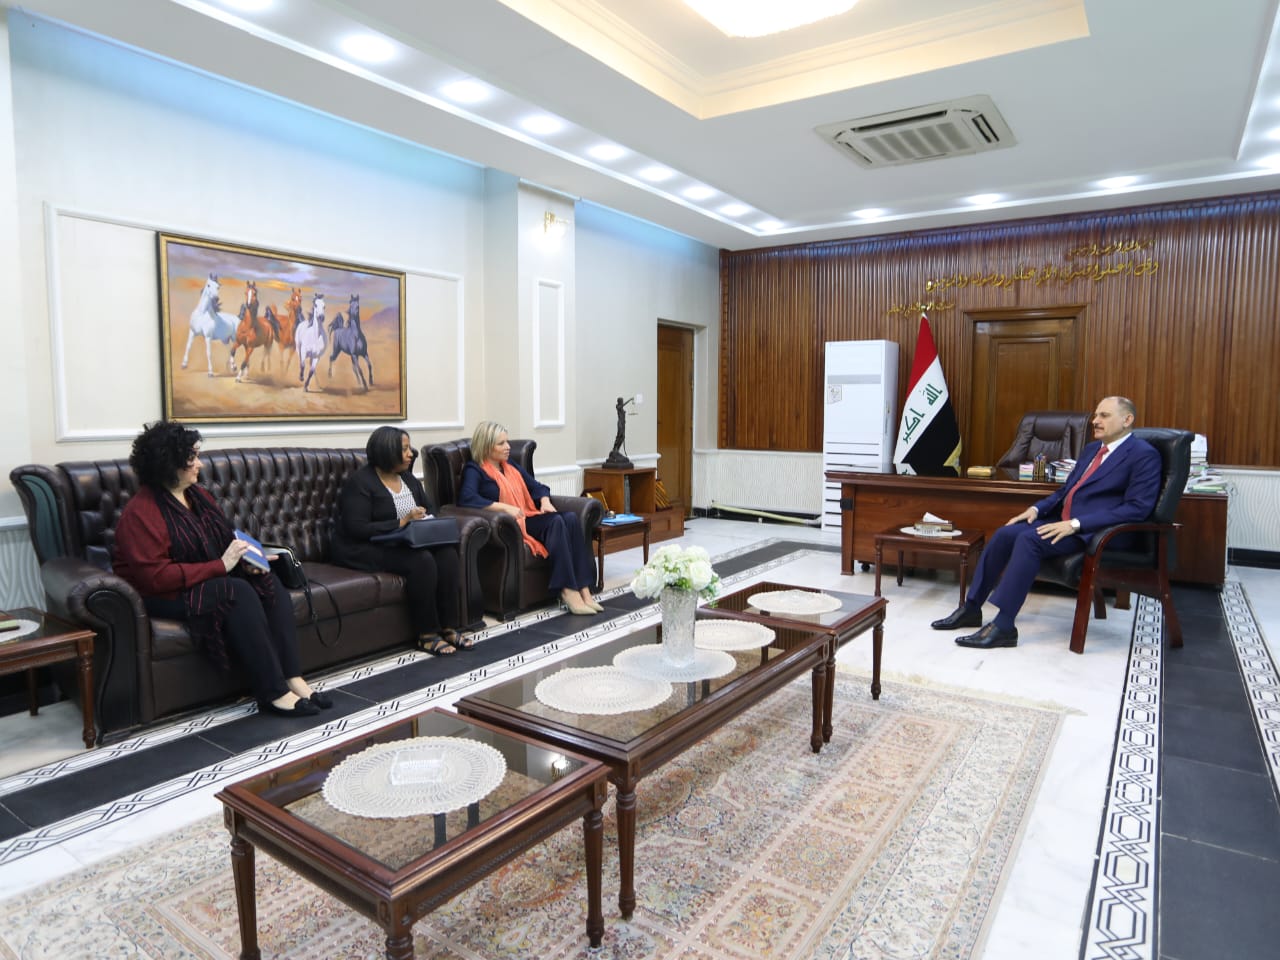 "Iraqi Chief Justice invites UNAMI to help address the election impediments of the "Federal Region